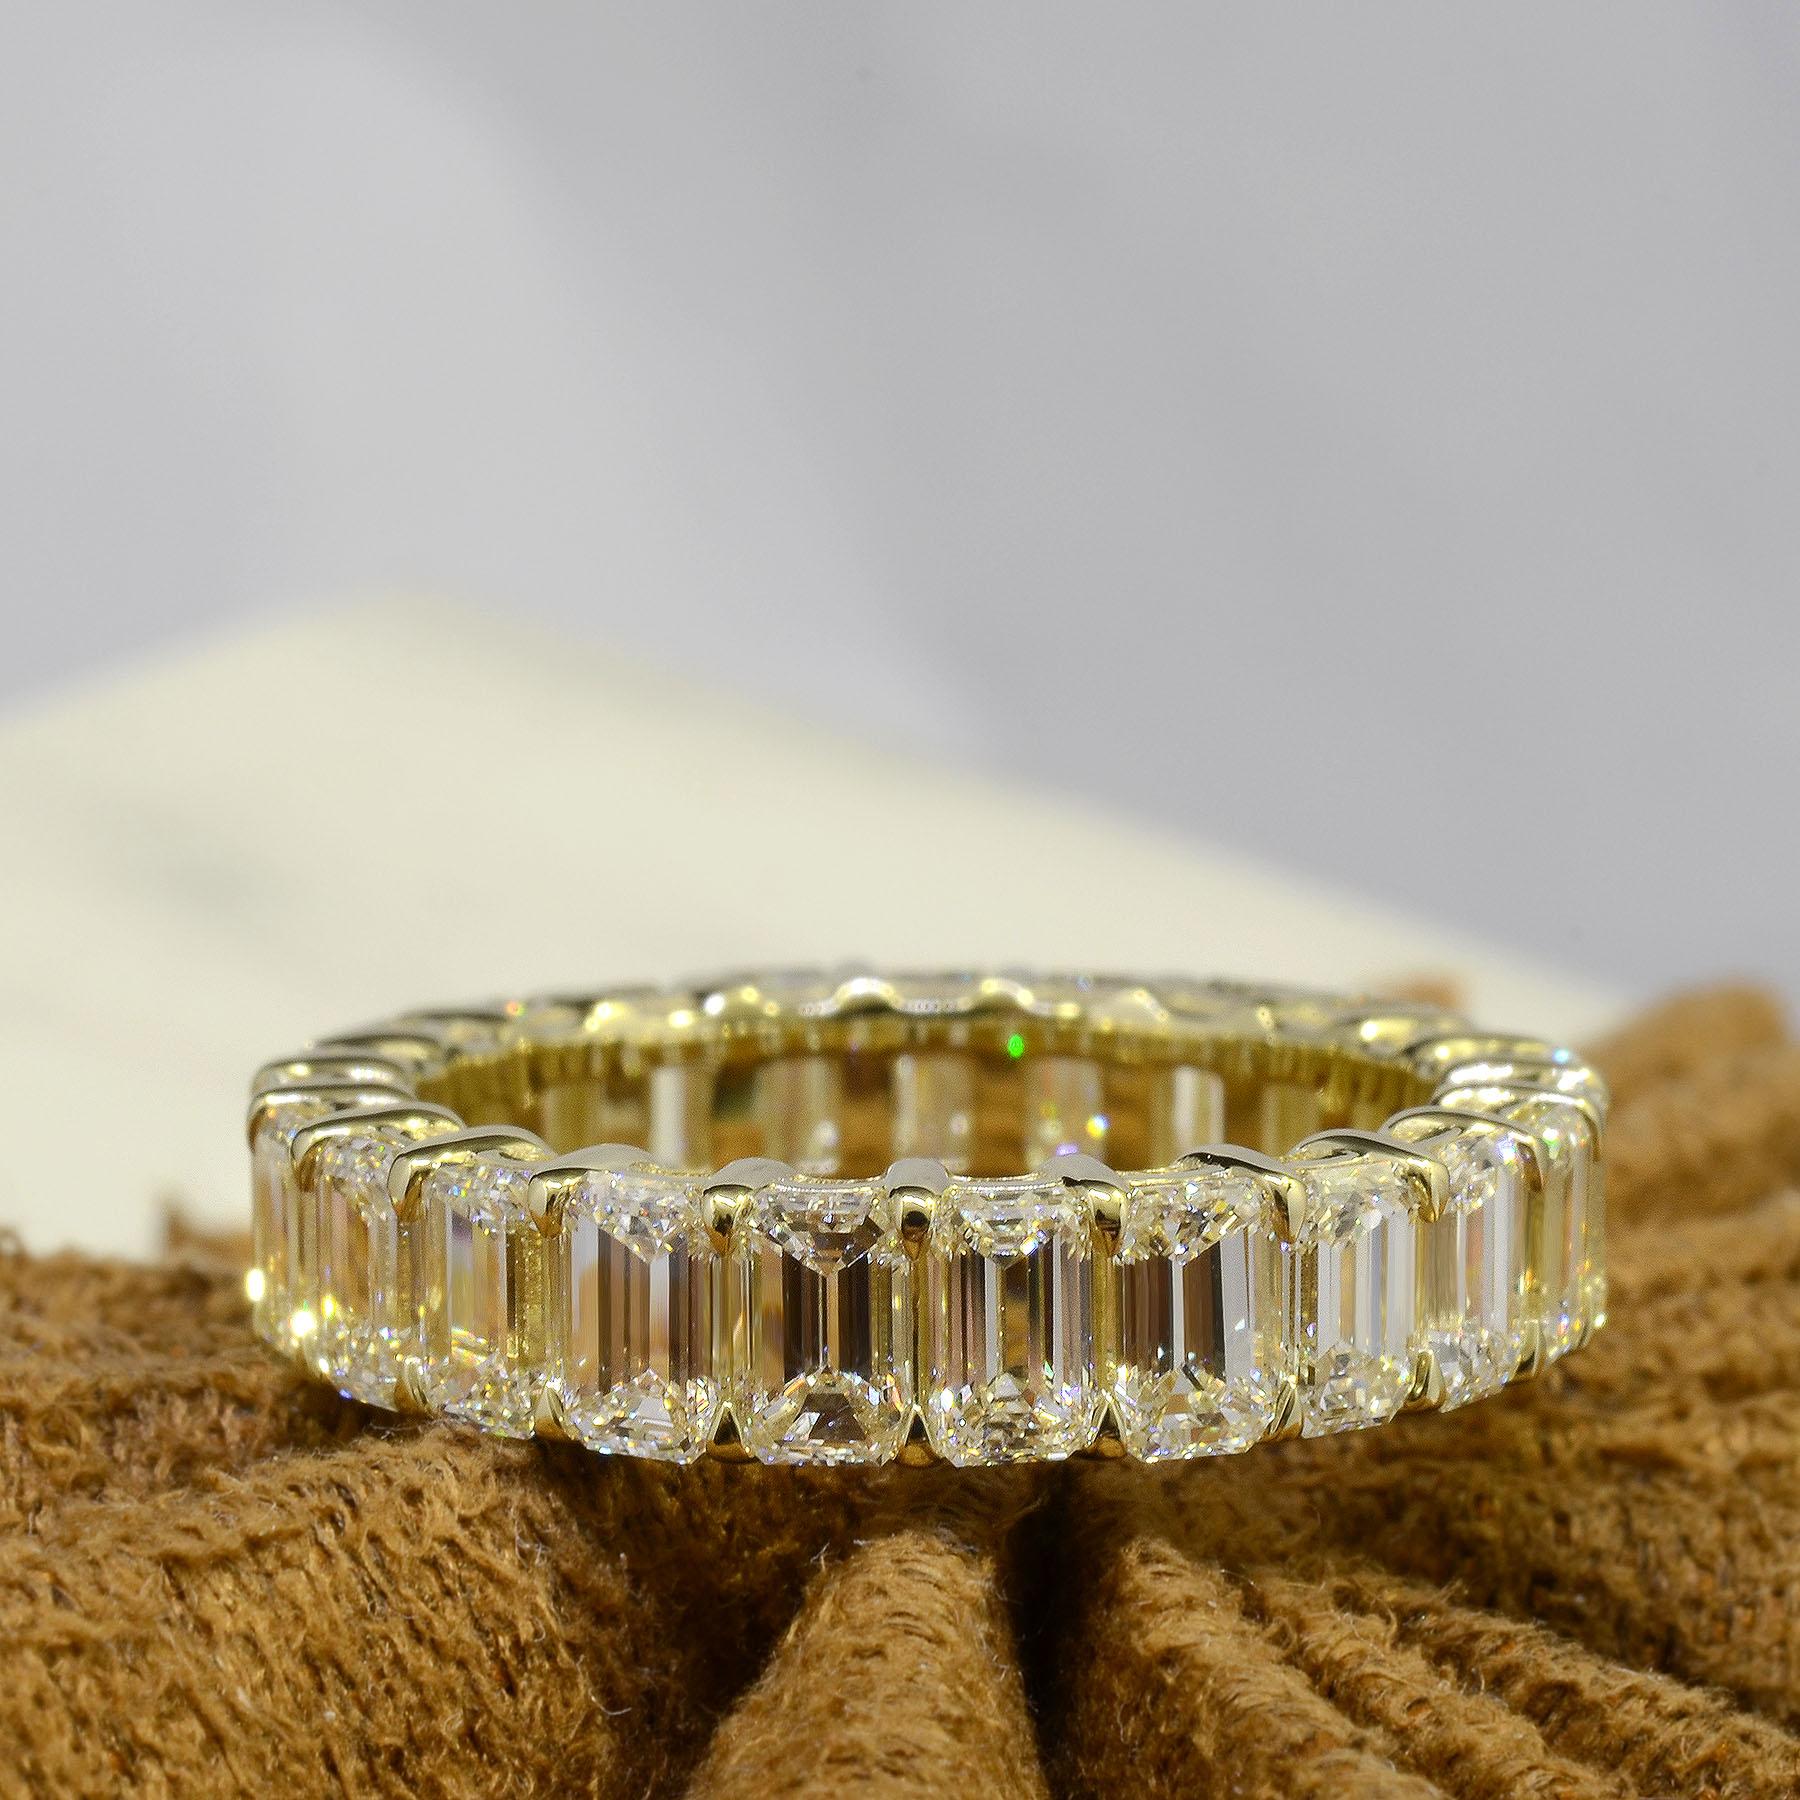 For Sale:  3 Carat Emerald Cut Eternity Band Shared Prong Design F-G Color VS1 Clarity 18k 4